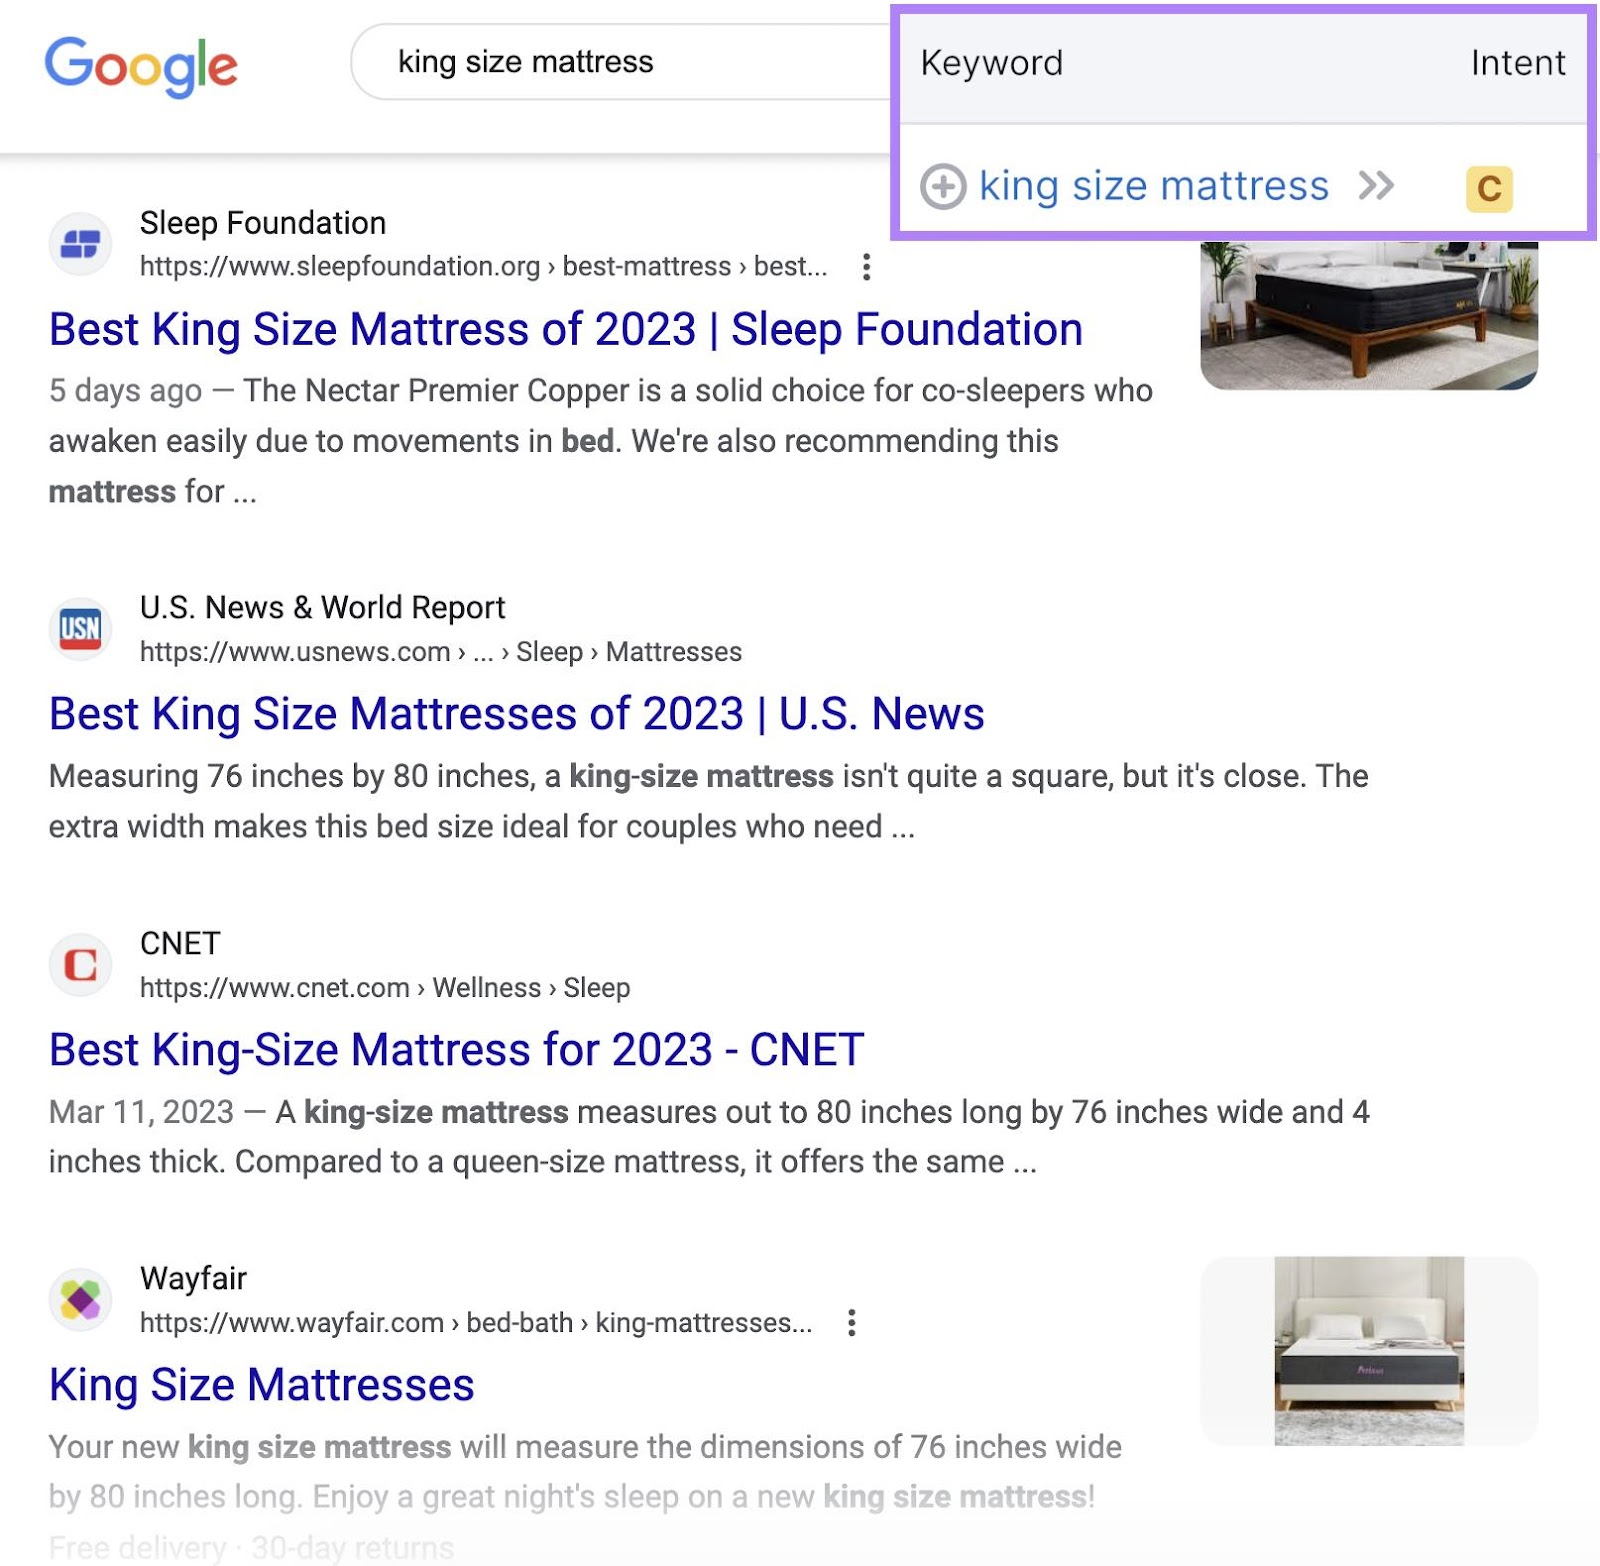 Google results for “king size mattress” search